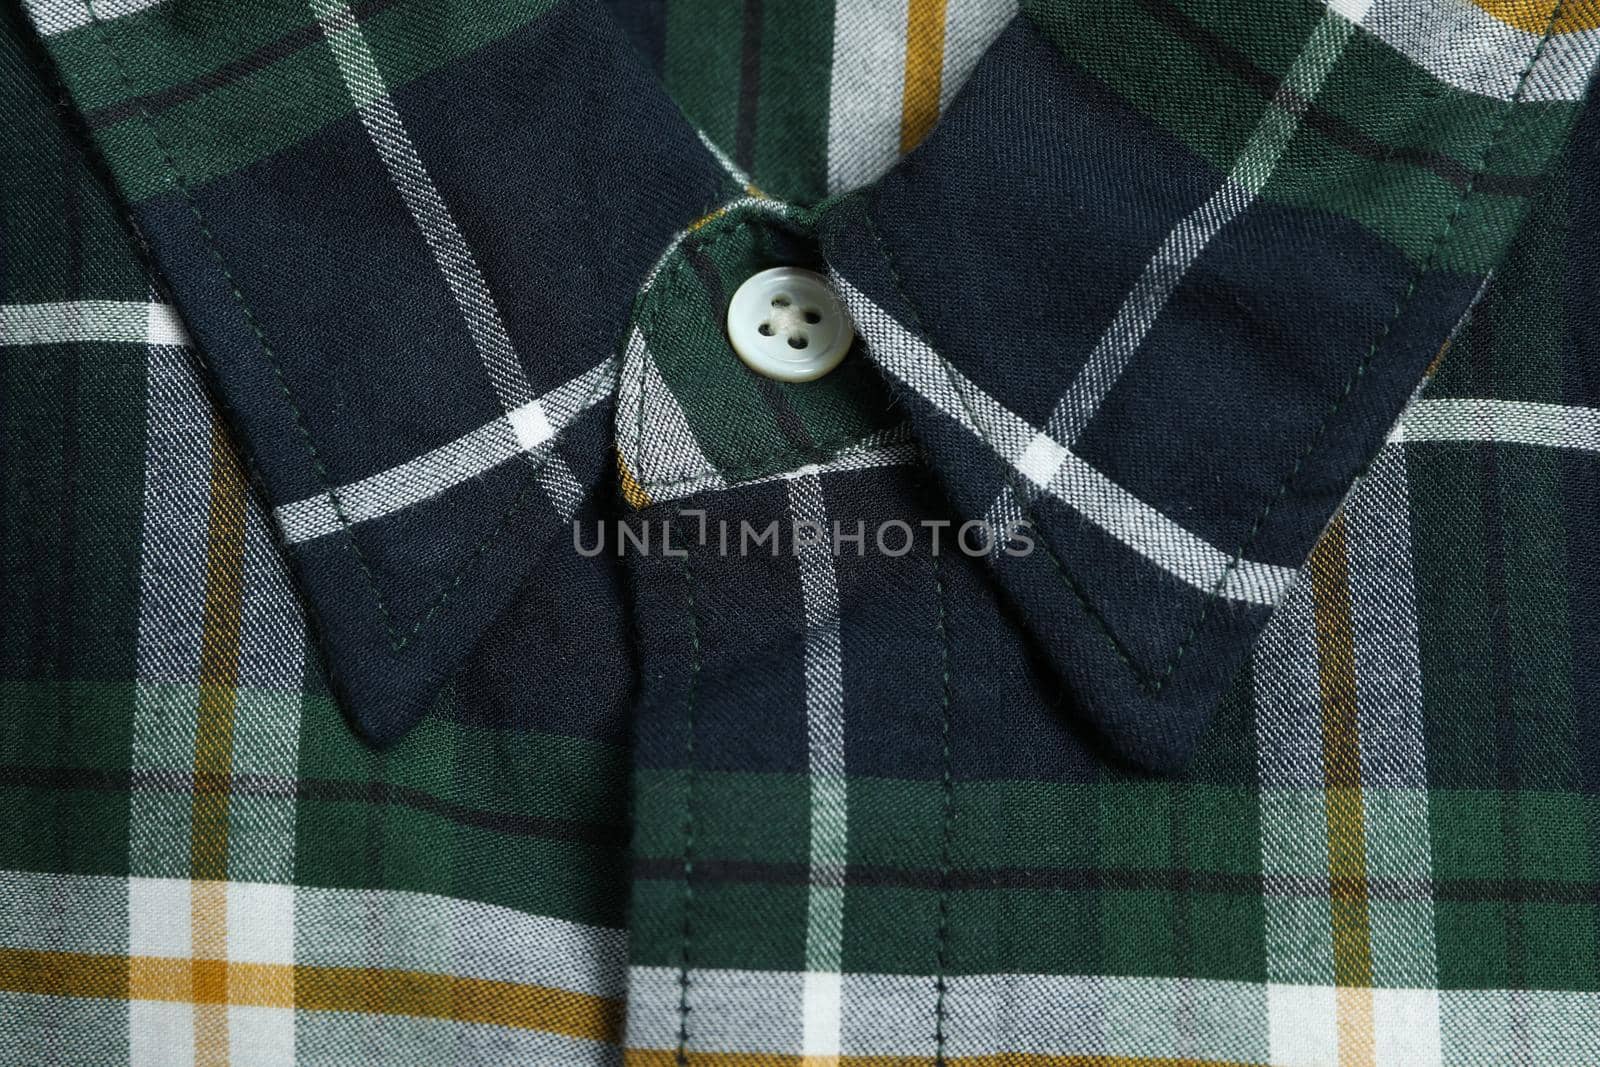 Checkered green shirt on whole background, close up